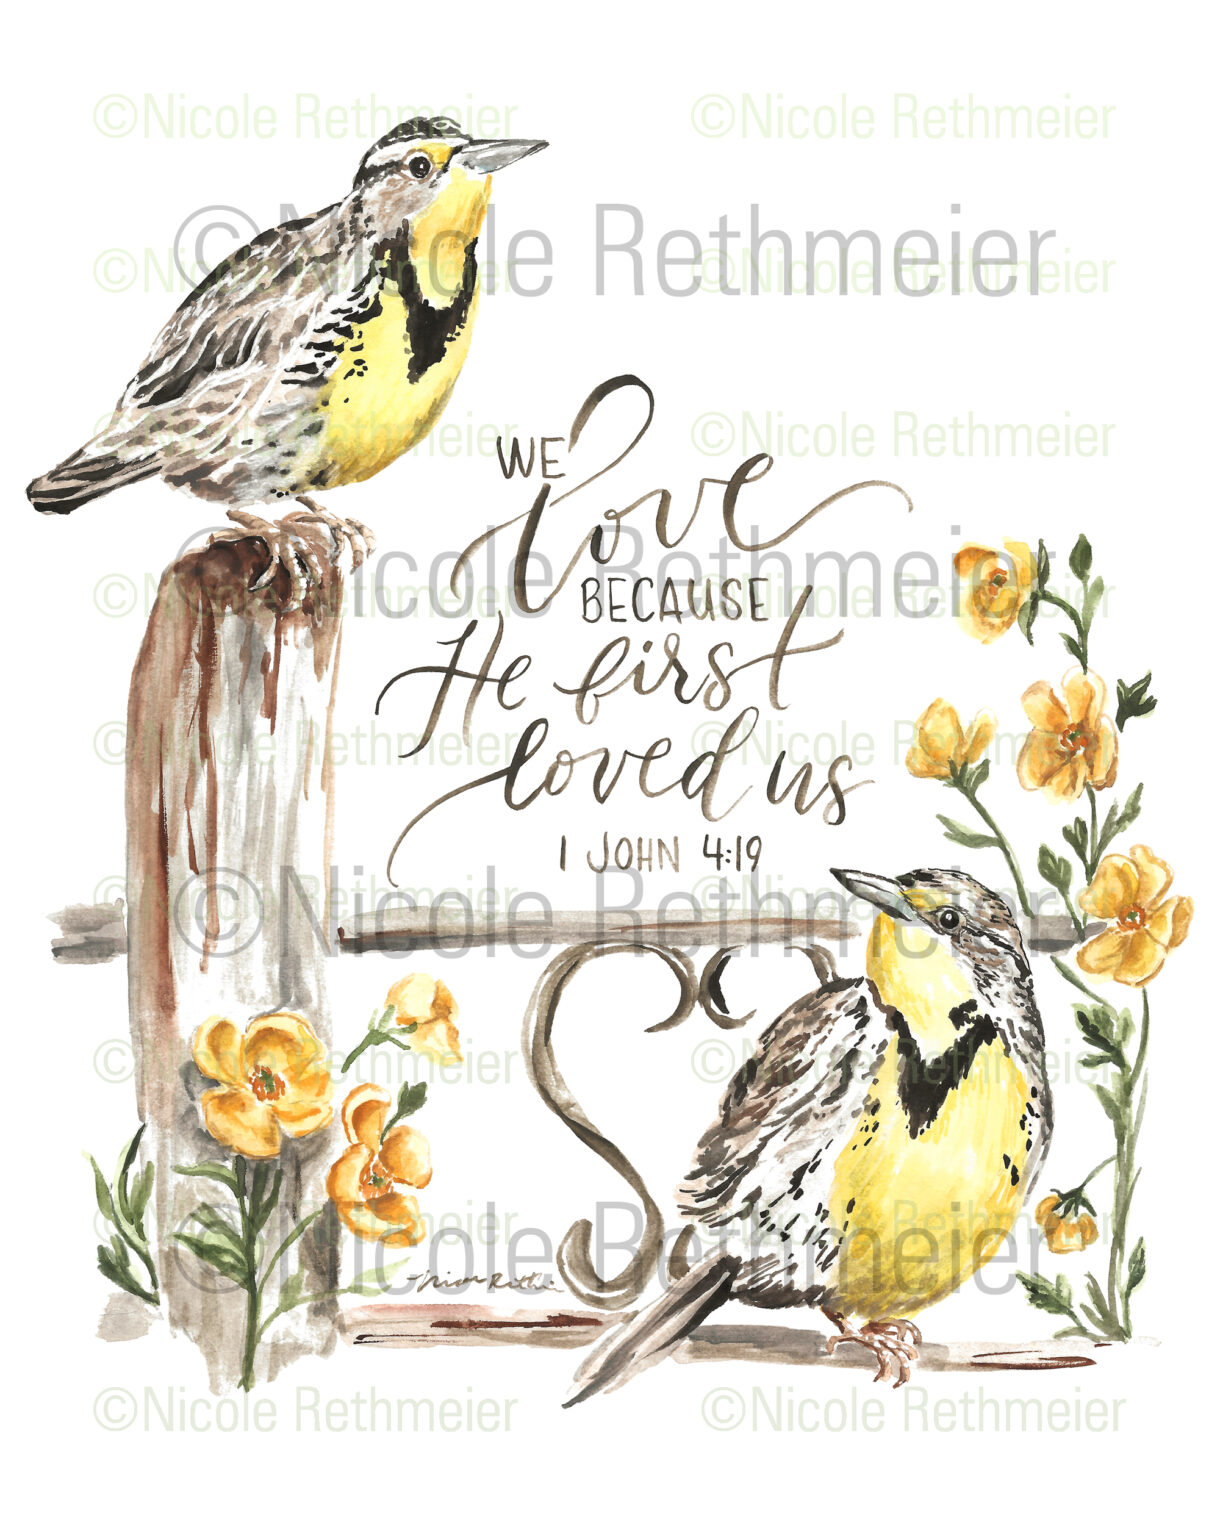 He First Loved Us 1 John 4:19 - Meadowlarks and buttercup flowers watercolor verse